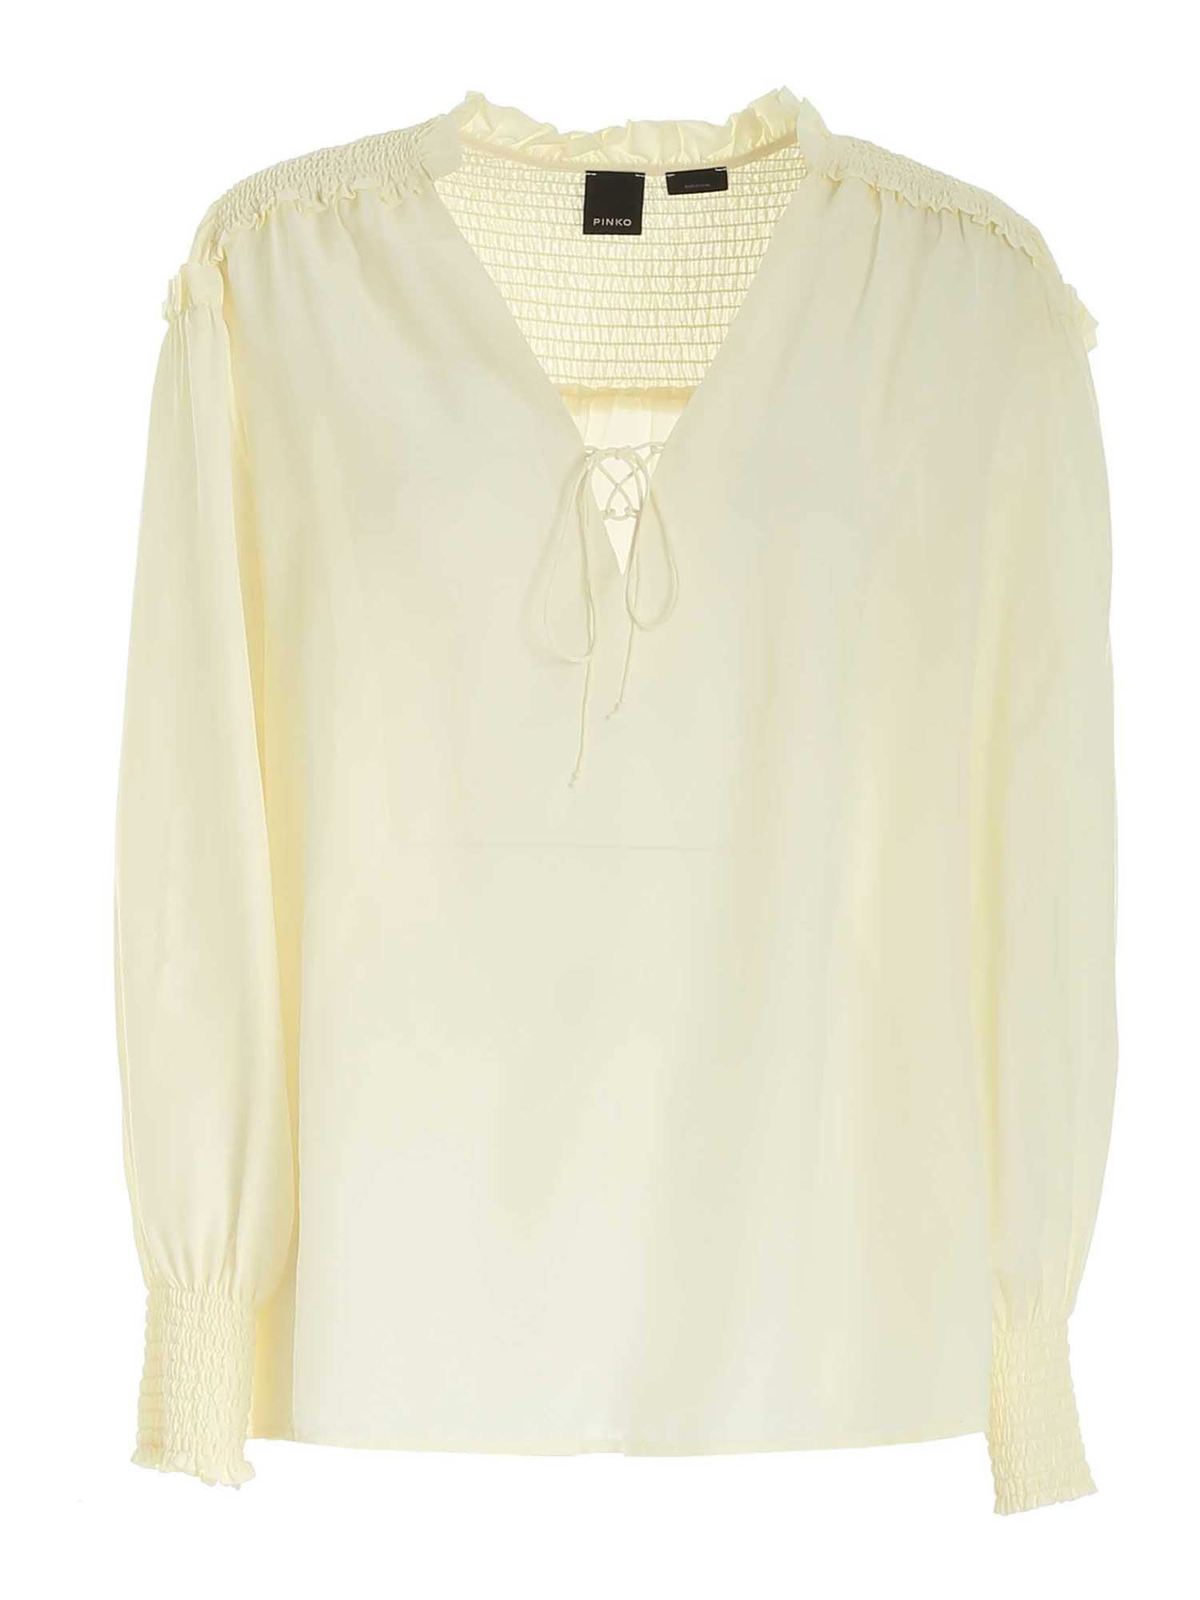 Blouses Pinko - Cassia blouse in white - 1G16JLY6ZDZ00 | iKRIX.com